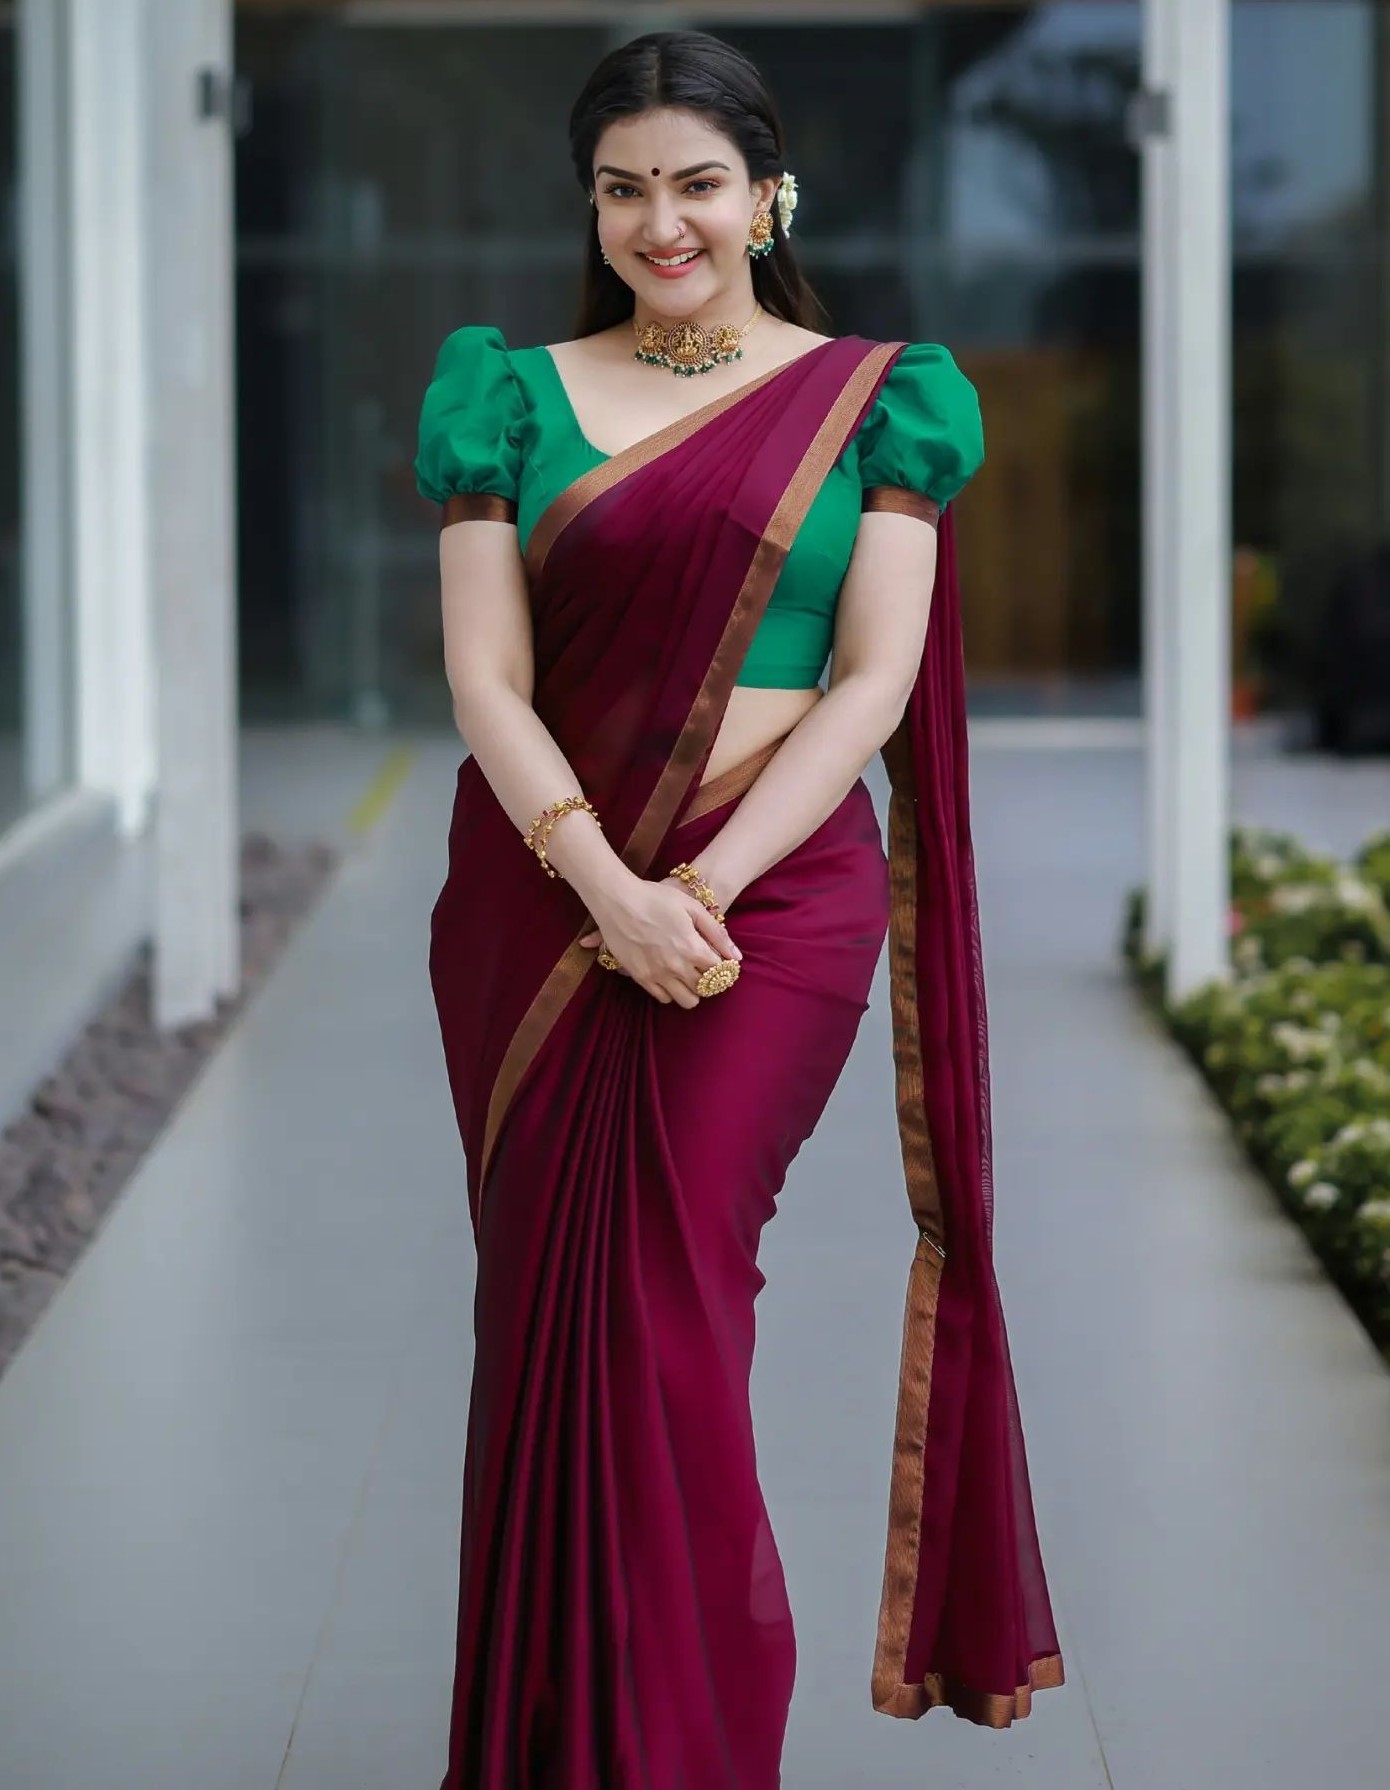 Honey Rose Xxx Videos - Honey Rose In Traditional Outfits And Looks - K4 Fashion